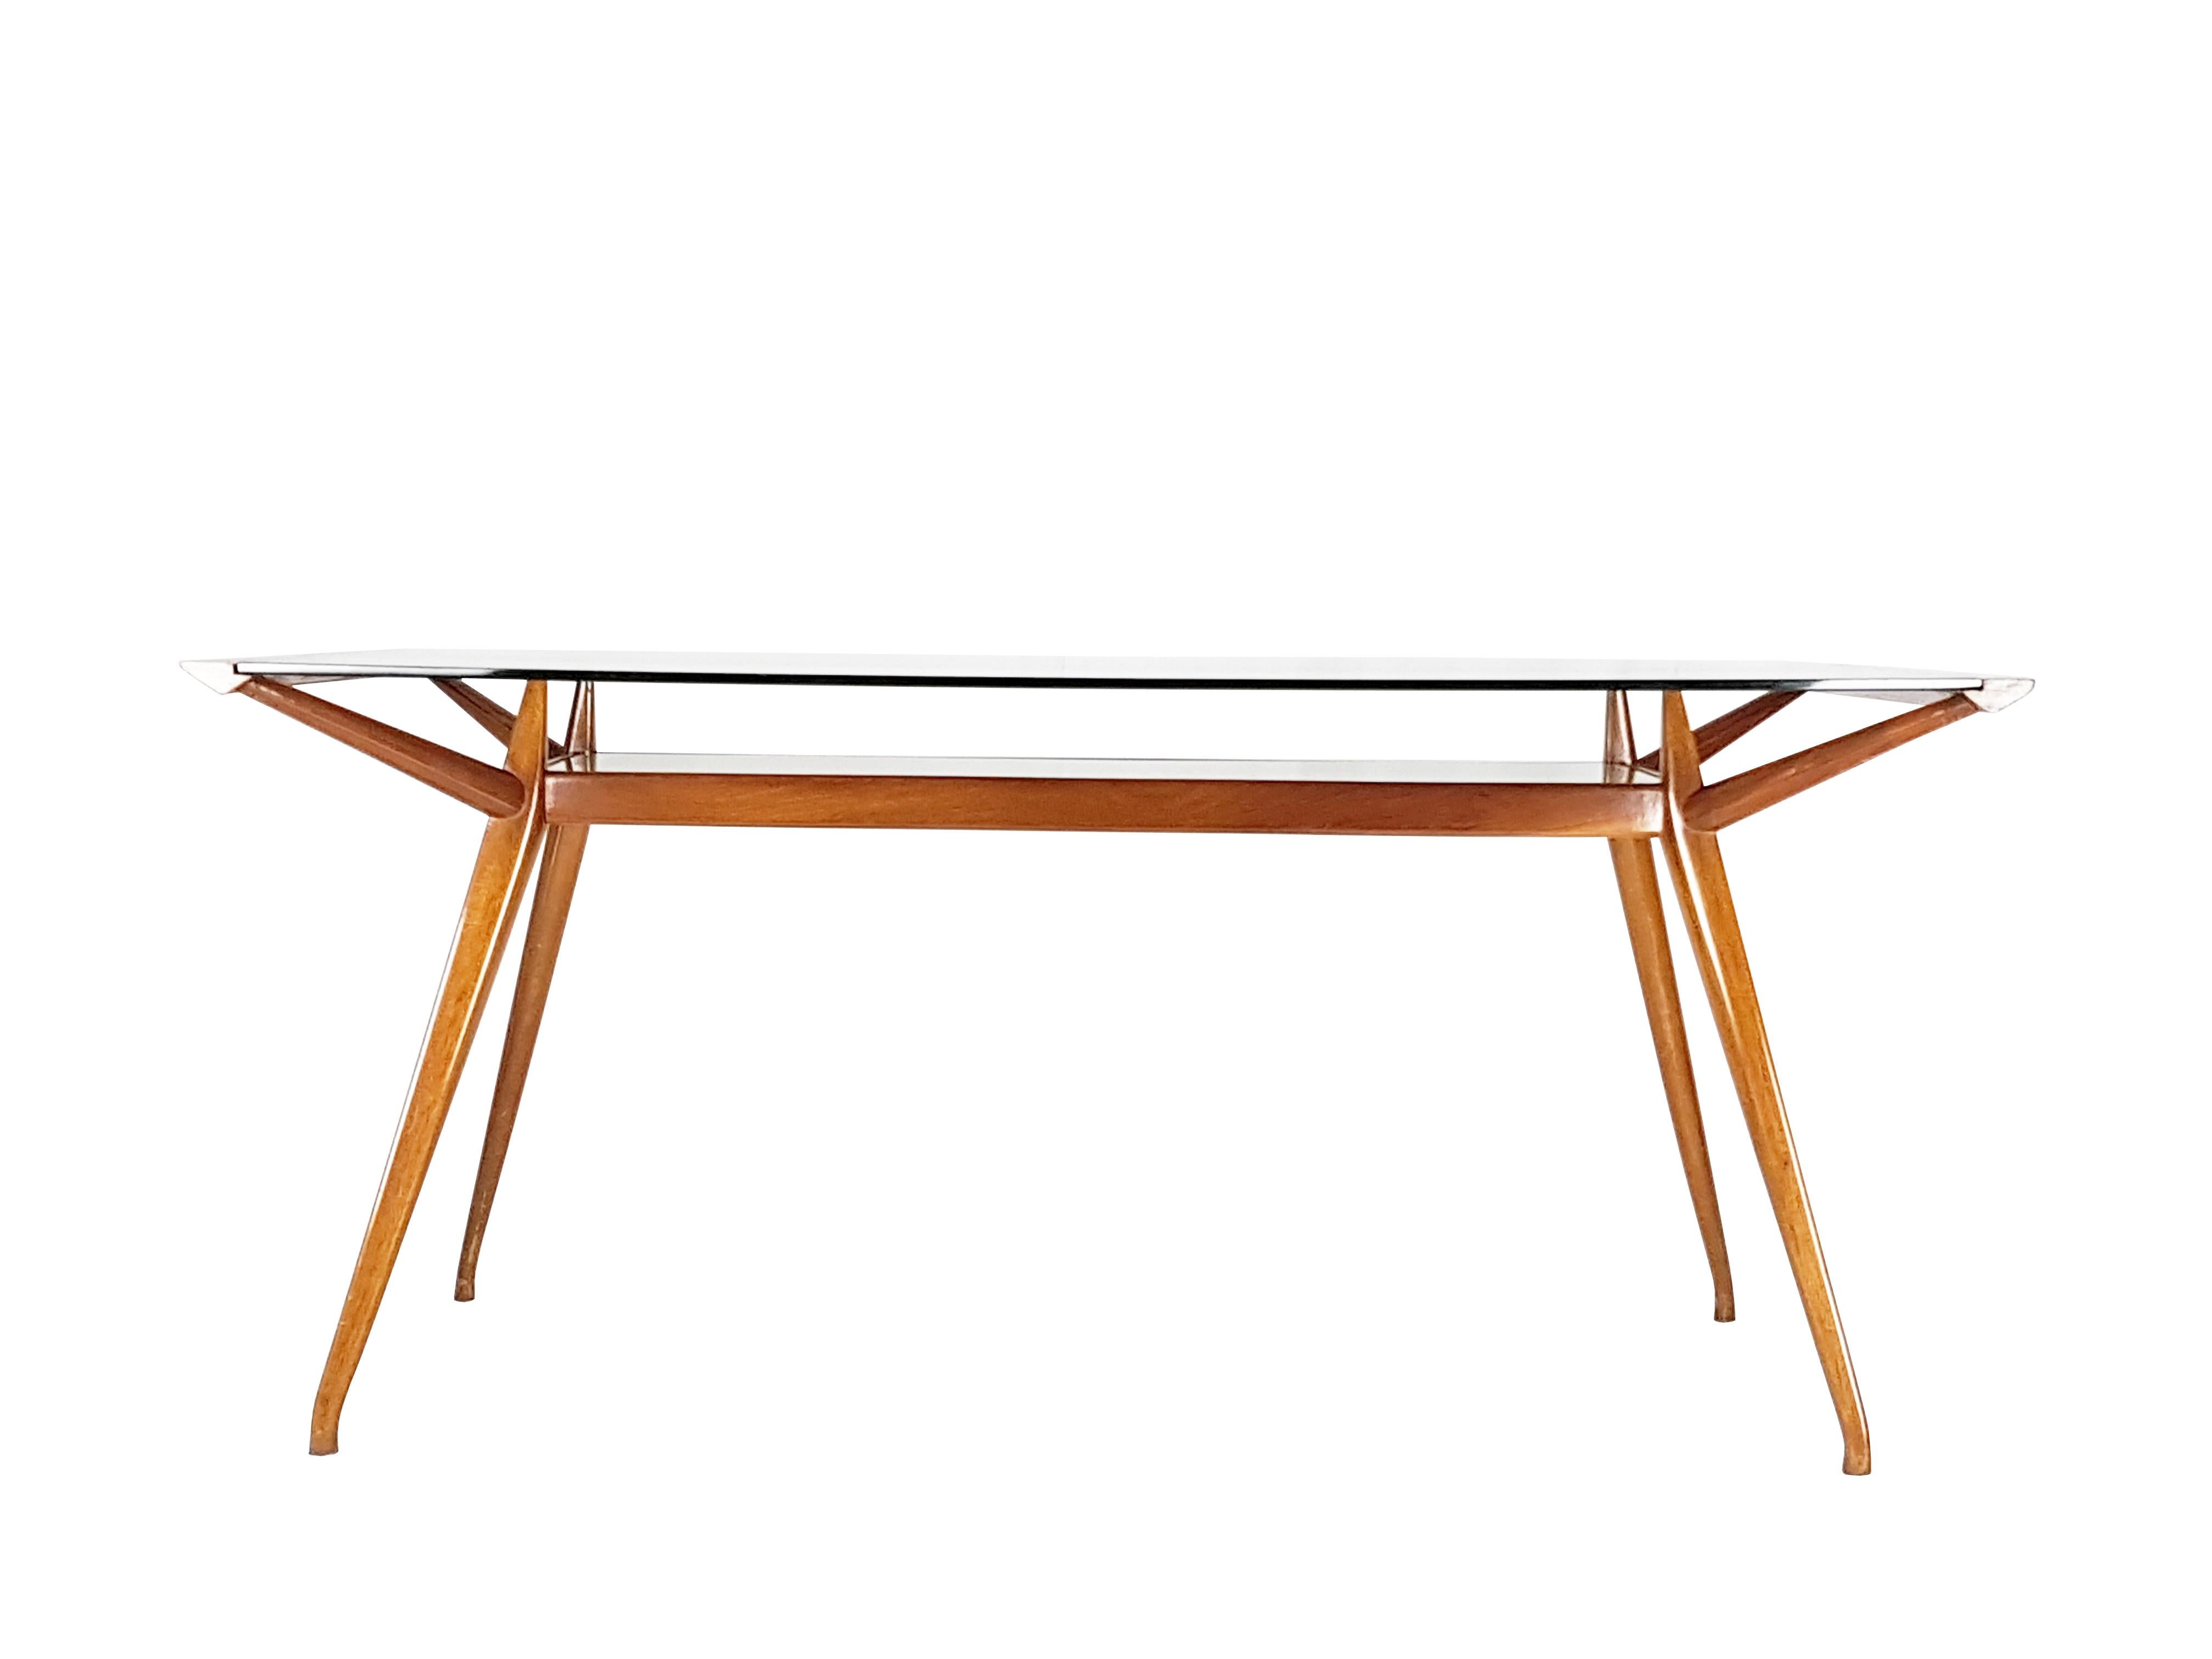 Italian Beech wood & Glass Mid-Century Modern dining table attributed to ISA For Sale 2